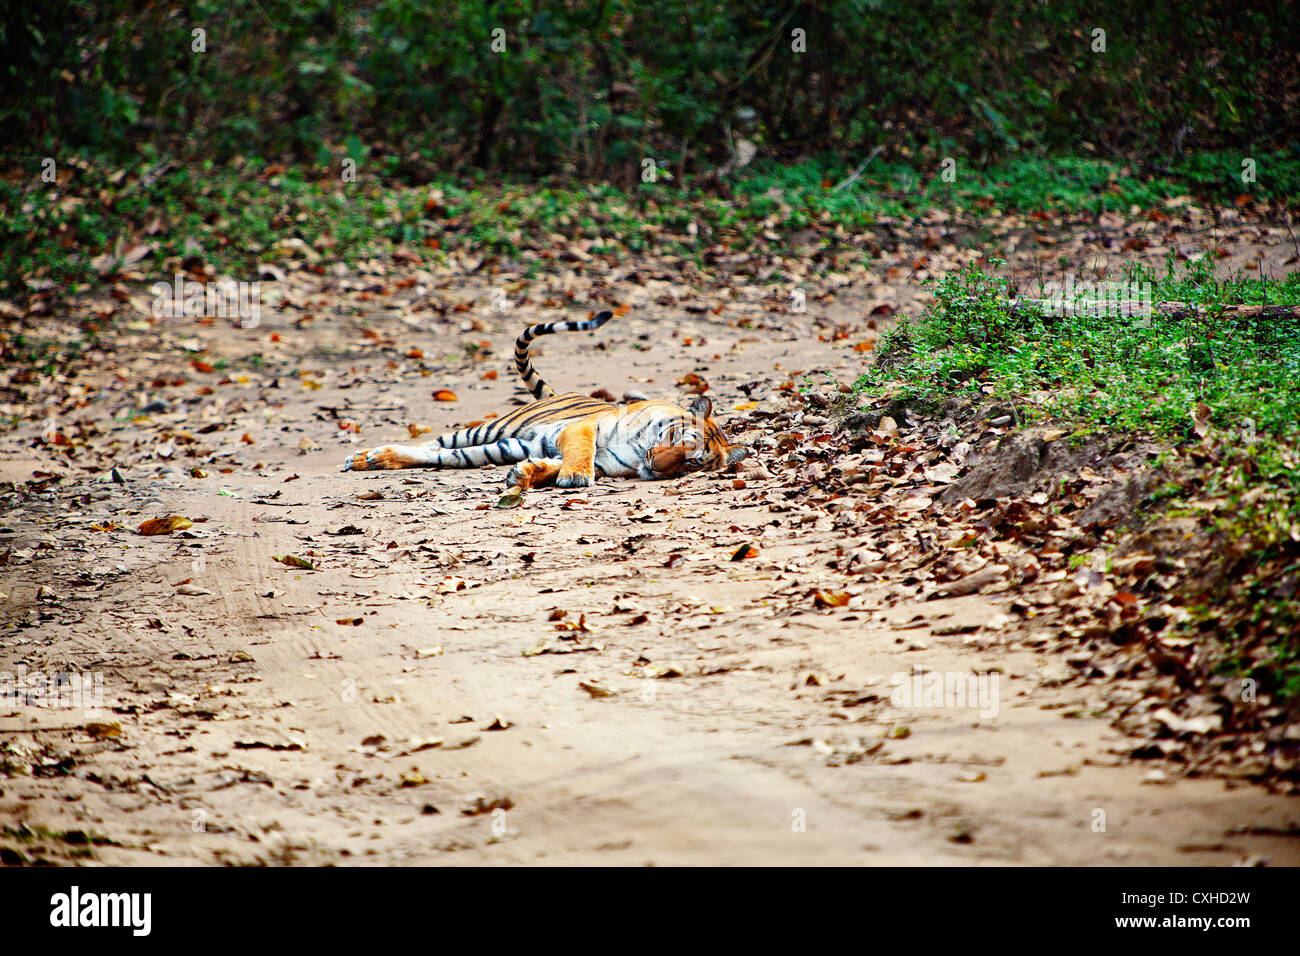 Tiger (3 years old female) on a road in Dhikala area in Jim Corbett Tiger Reserve, India. Stock Photo